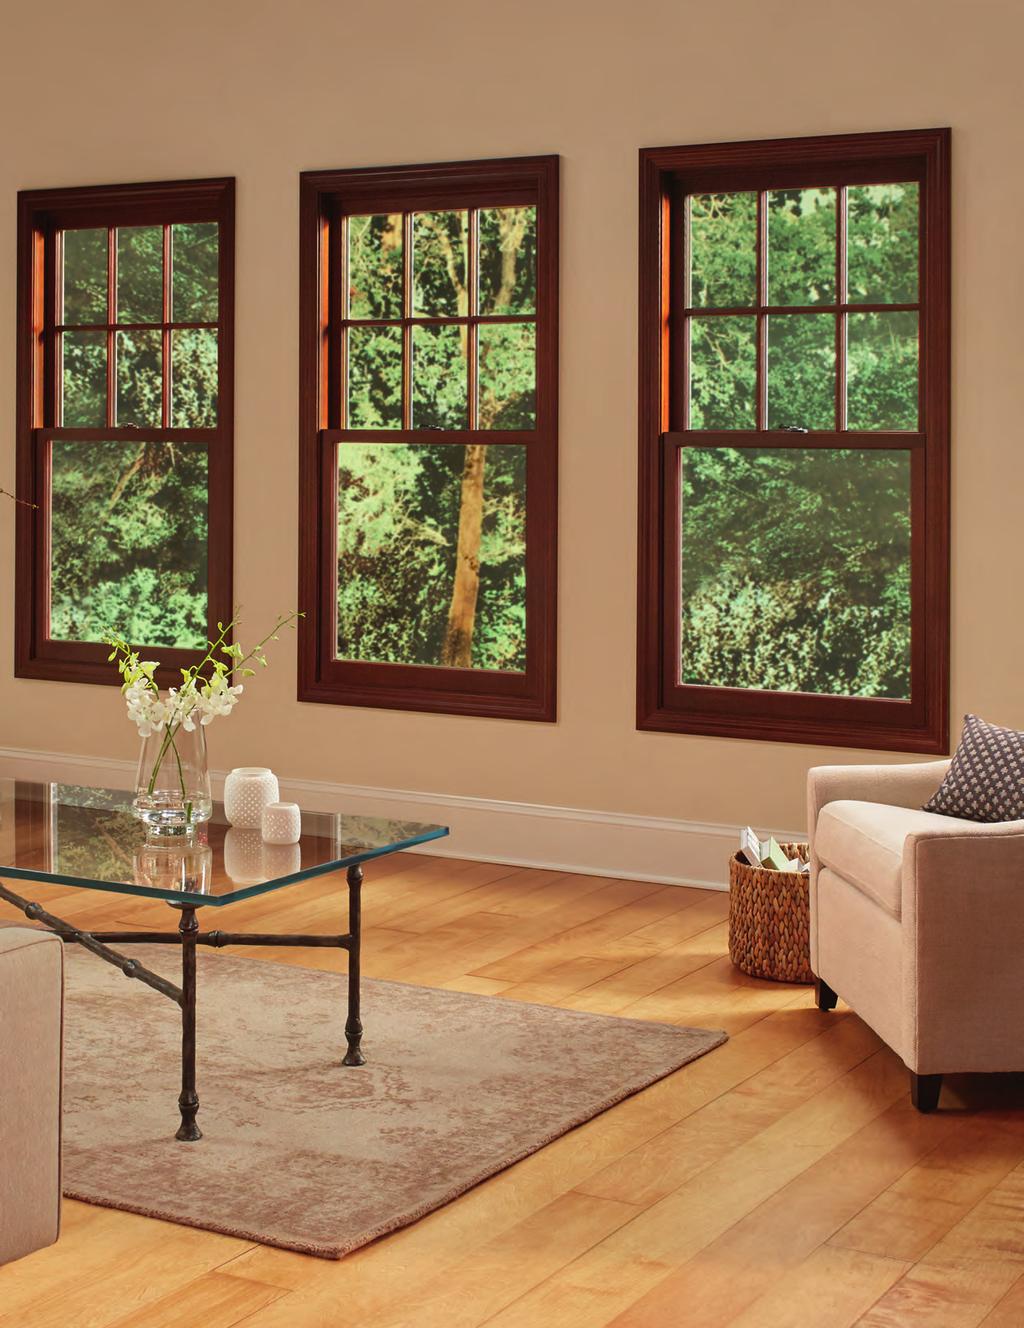 14 NEXT GENERATION ULTIMATE DOUBLE HUNG The Marvin Next Generation Ultimate Double Hung Window is a classic reinvented.